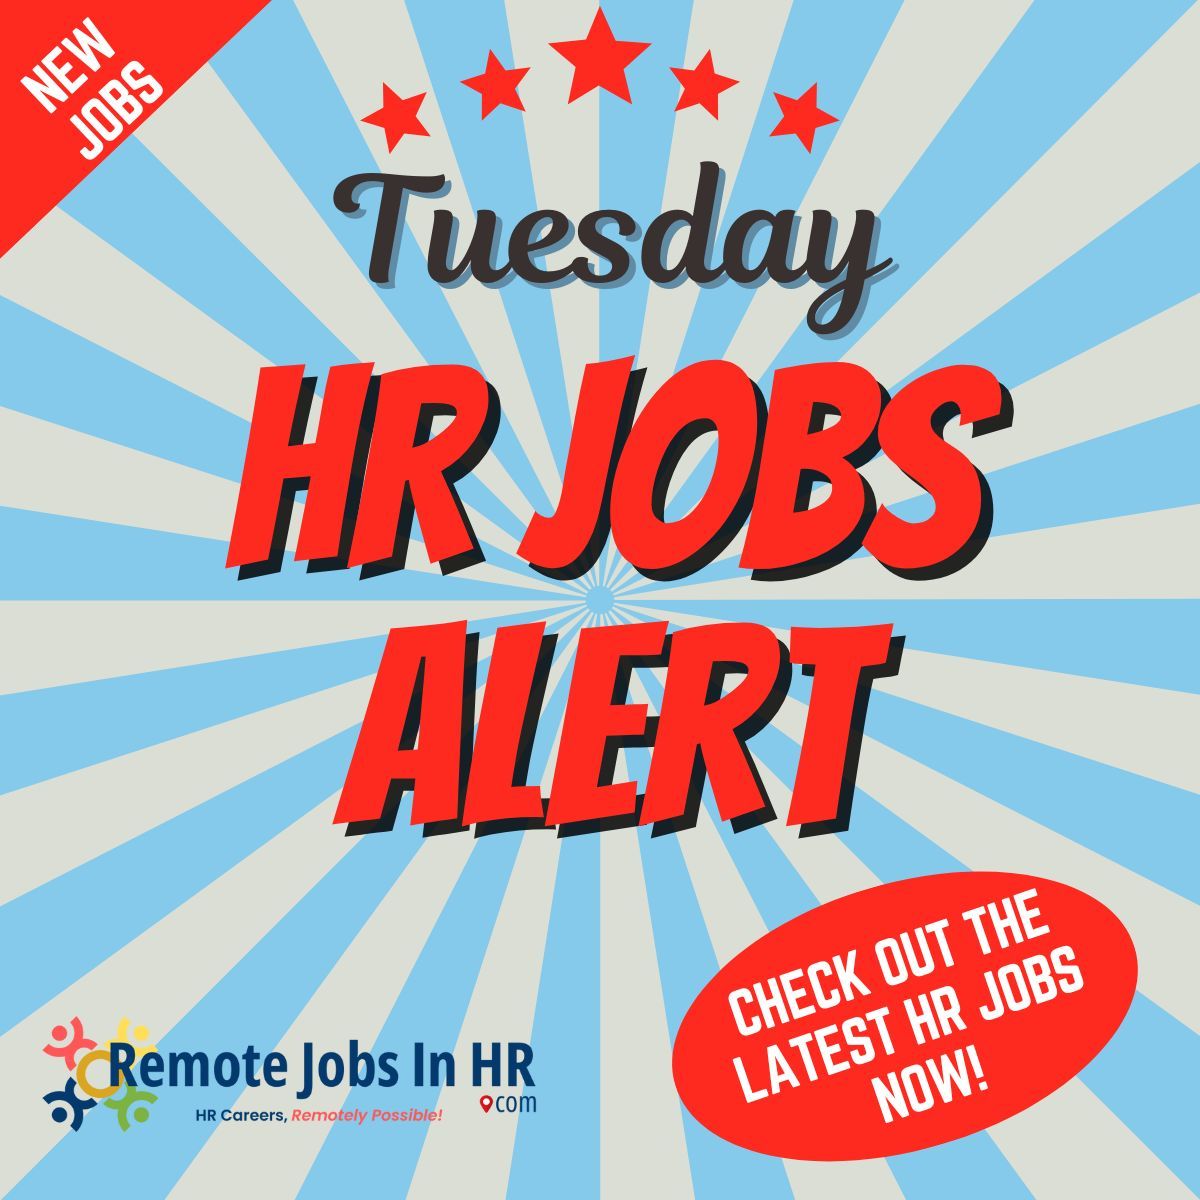 🎁 HR Jobs Alert 🎯 May 7, 2024
Click ➡️ buff.ly/3xUjij to view the latest jobs @ Remote Jobs In HR.

#WFH #Remote #JobAlert #Hiring #HiringAlert #HiringNow #HR #HRJobs #HumanResources #JobListing #Jobs #JobSeekers #Careers #JobOpening #Employment #Homeoffice #Hybrid